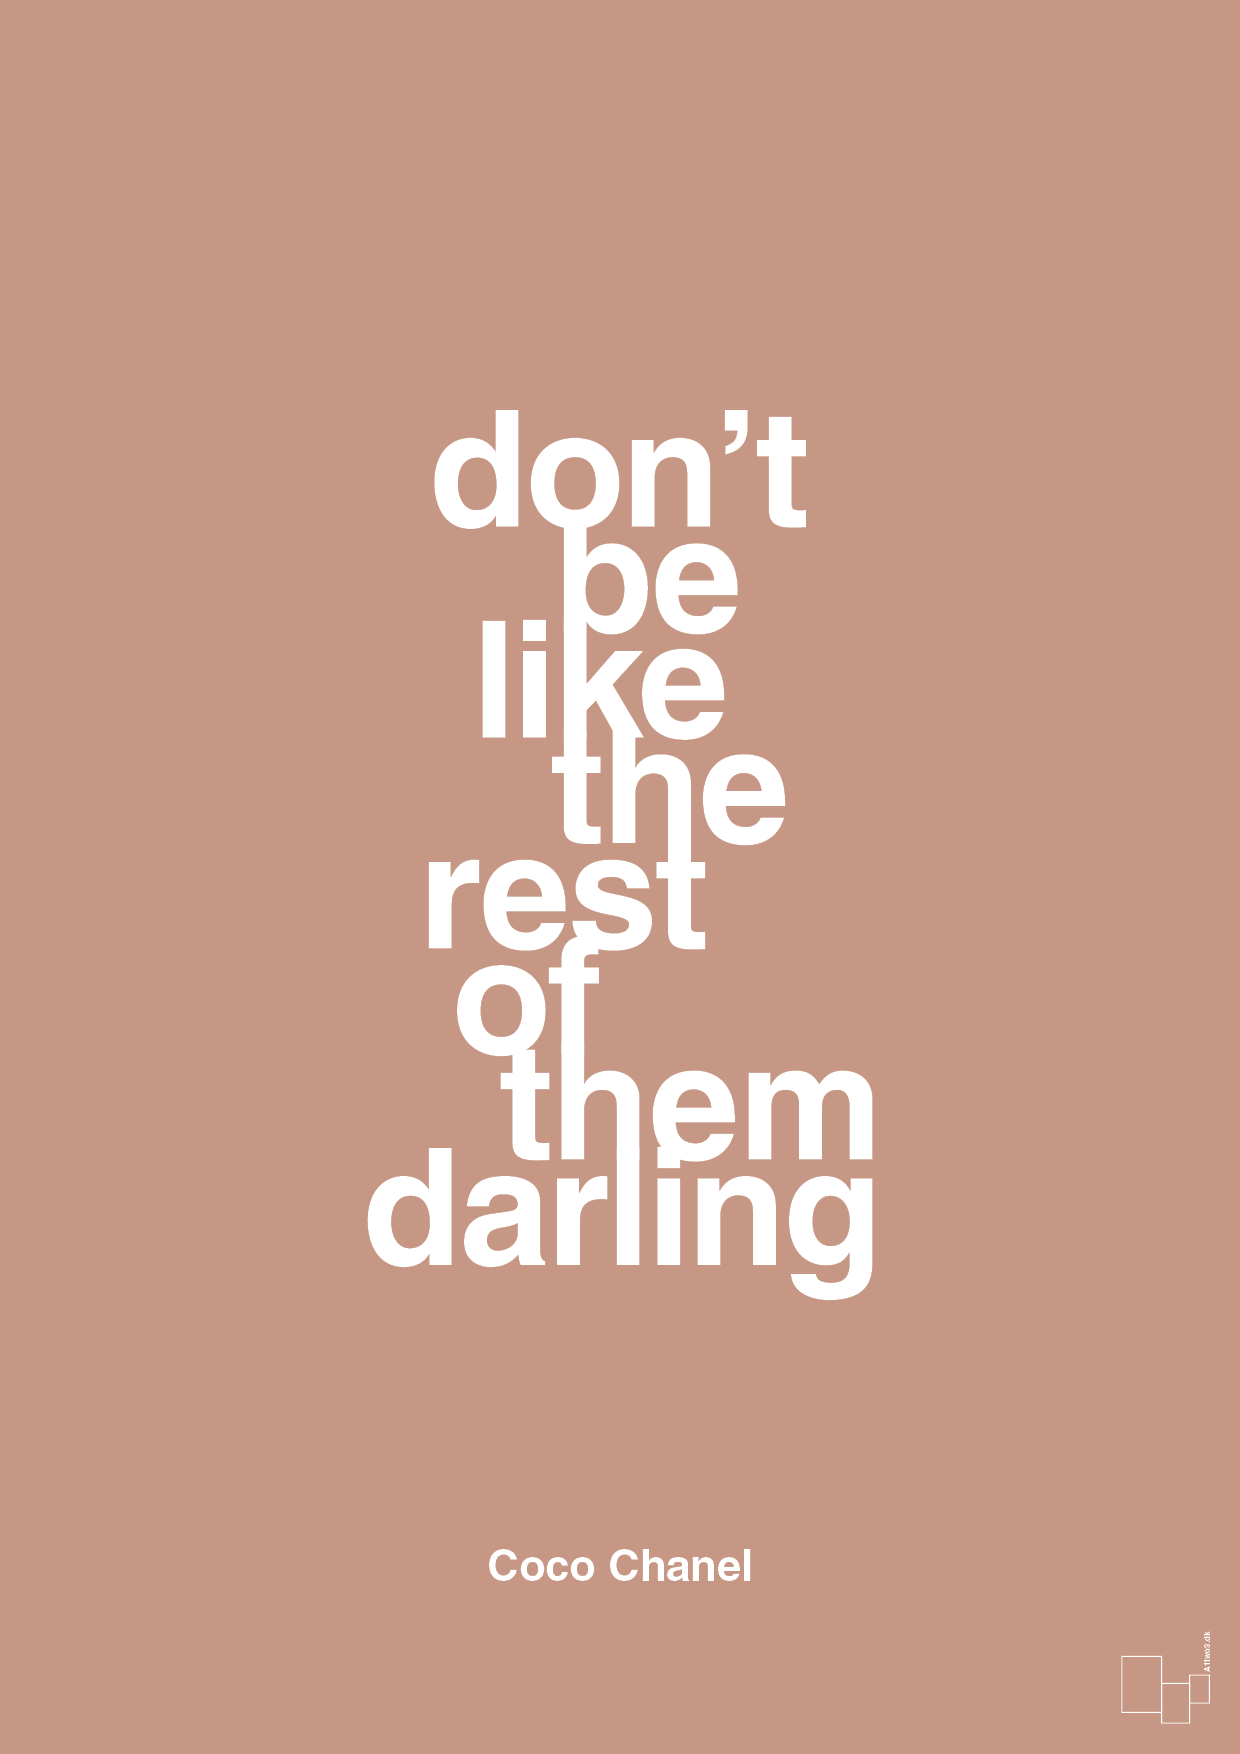 don’t be like the rest of them darling - Plakat med Citater i Powder